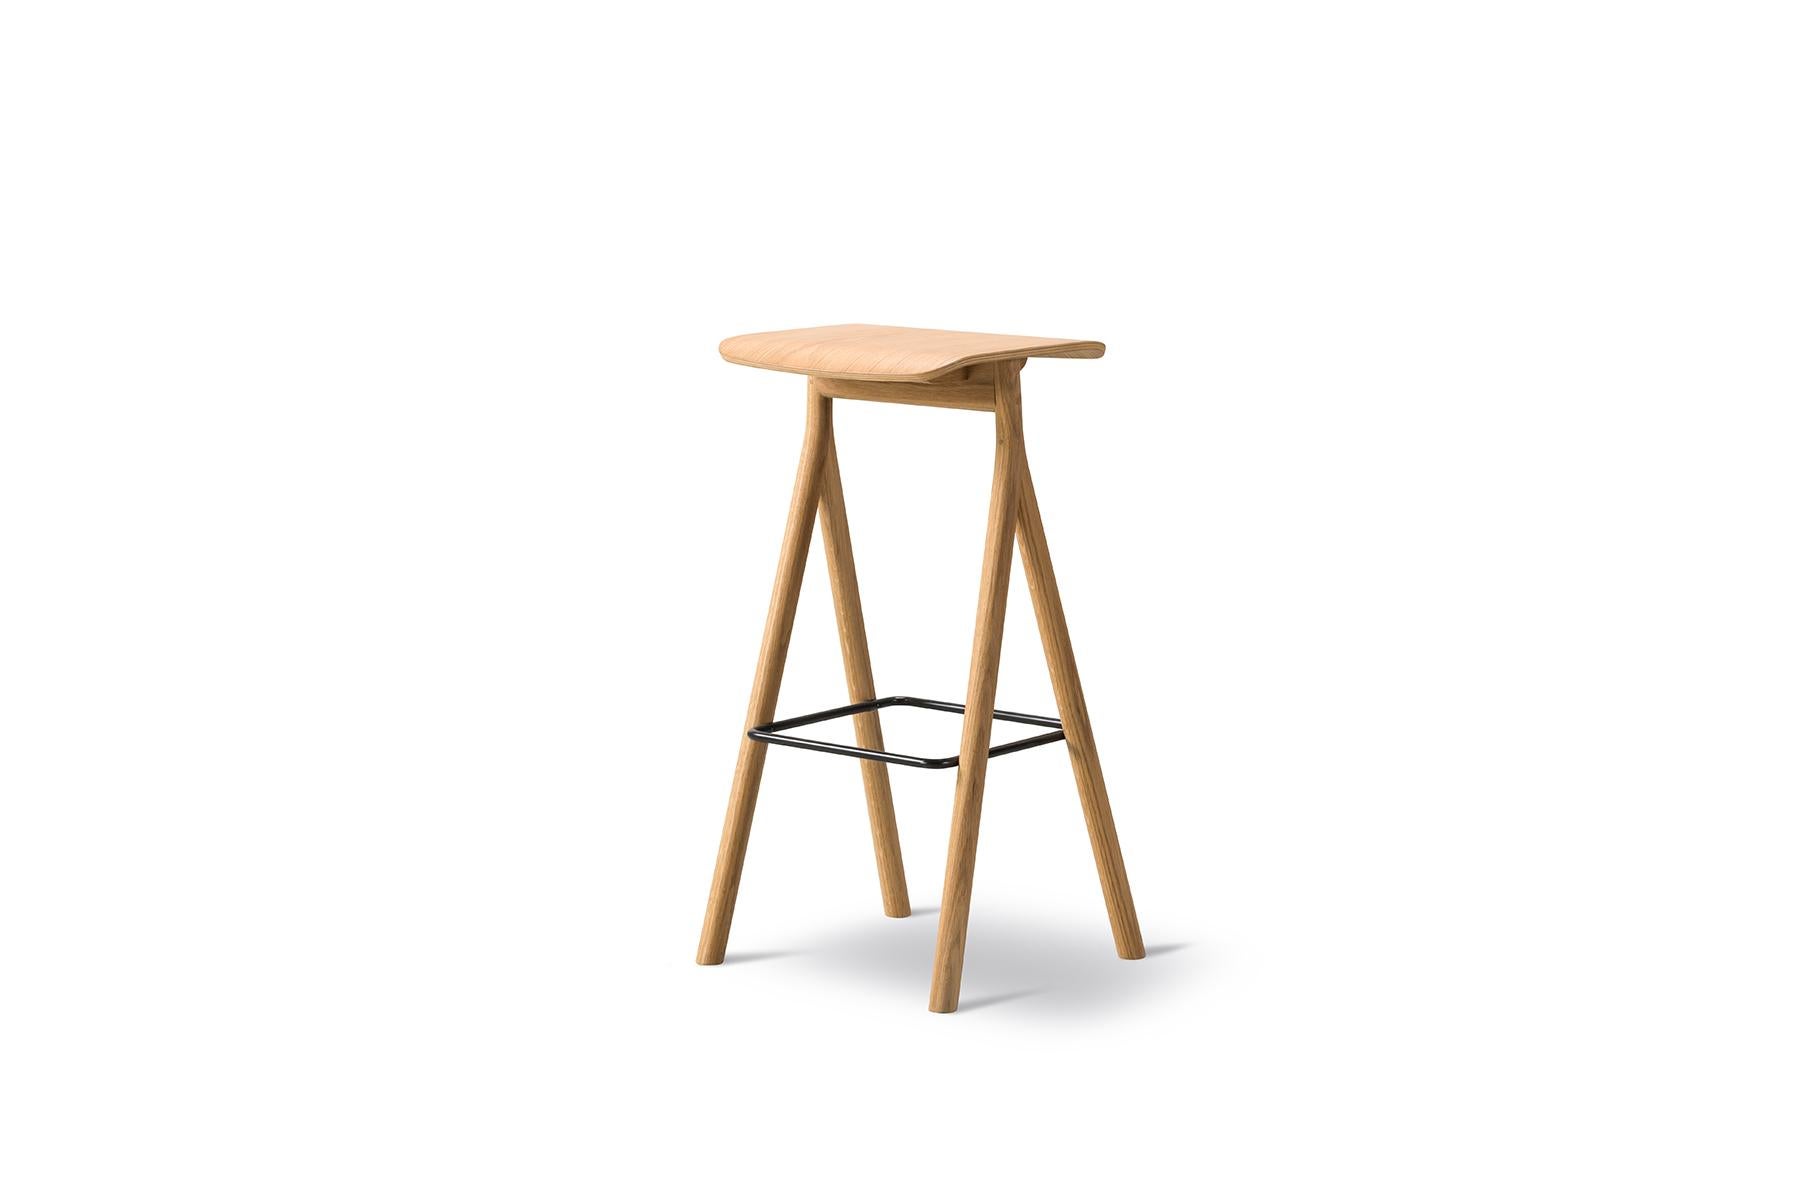 Thau + Kallio Yksi barstool
The Yksi stool stands strong yet appears light with its signature Y-shaped legs positioned upside-down. Crafted from solid oak and available in lacquered or black lacquered oak, the impression is minimal with maximum